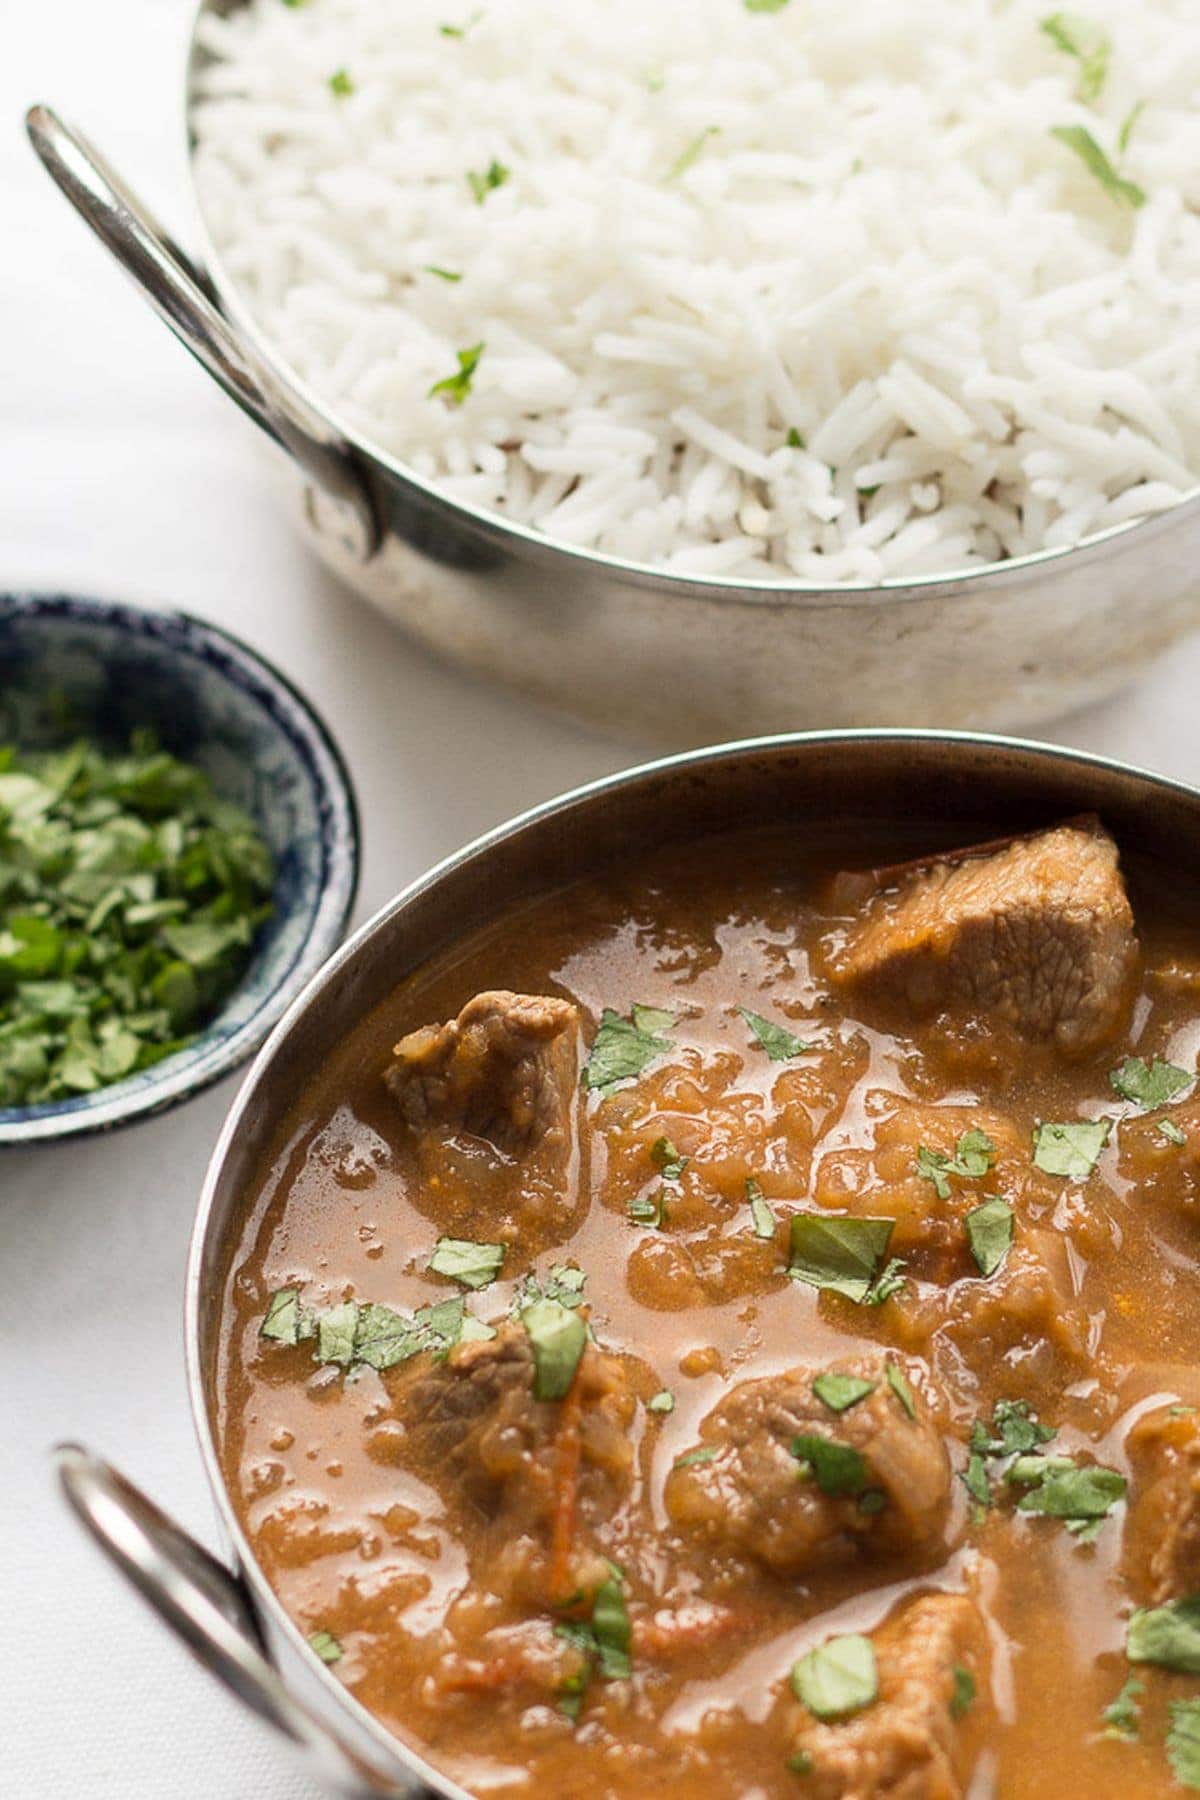 A balti dish of skinny lamb curry with a small dish of chopped coriander and a balti dish of rice in the background.